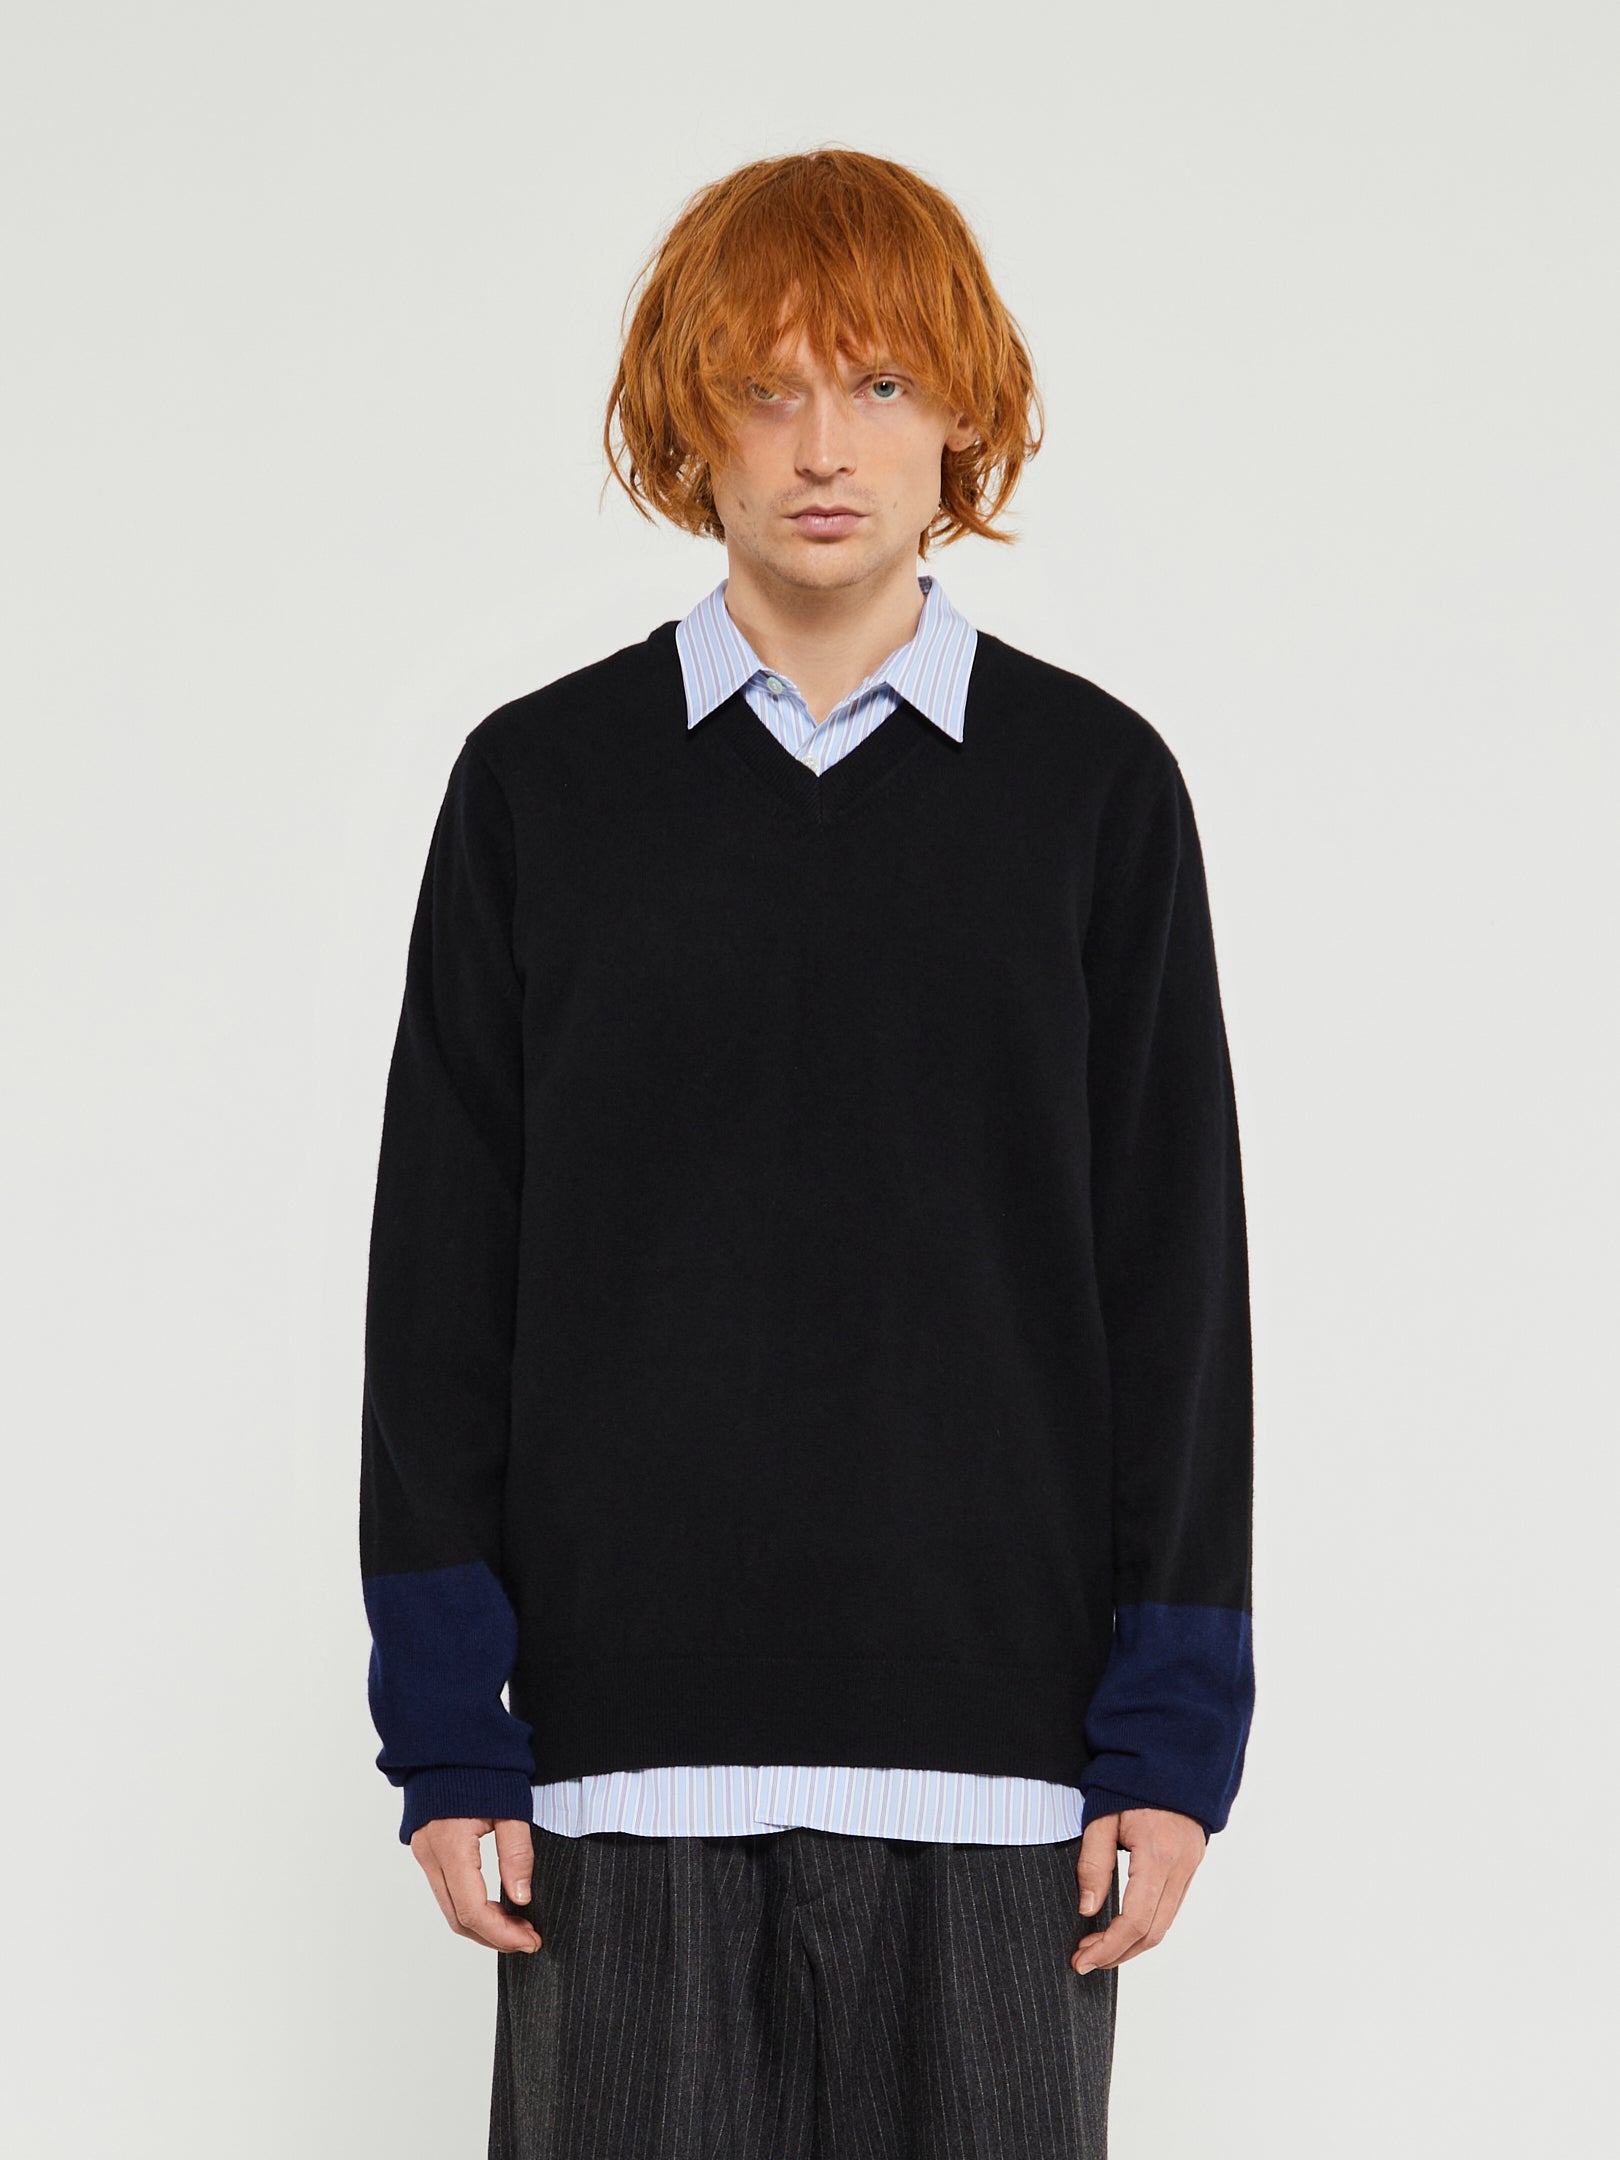 Comme des Garçons SHIRT - Pullover in Black and Navy